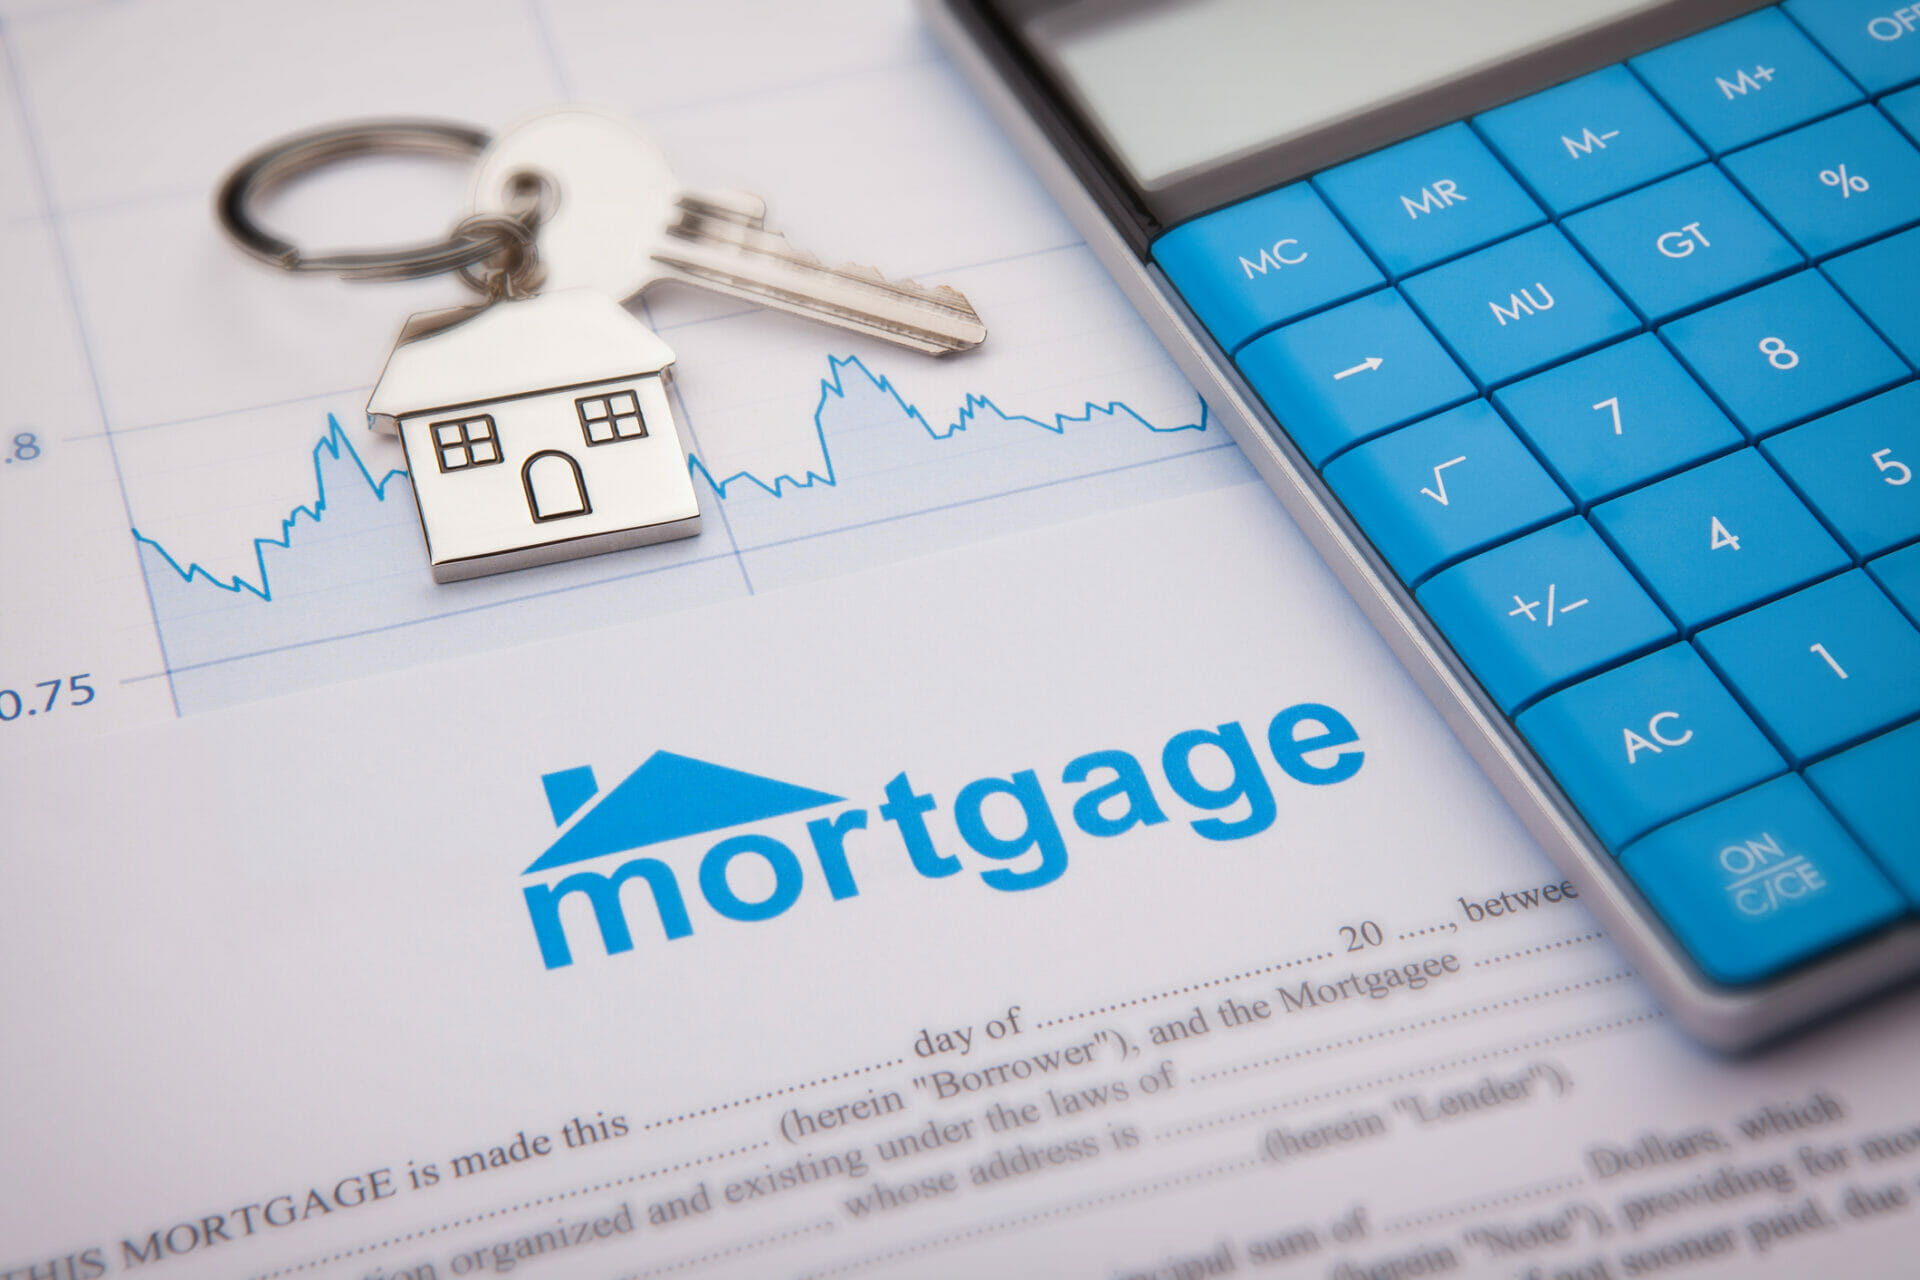 Mortgage form with a calculator